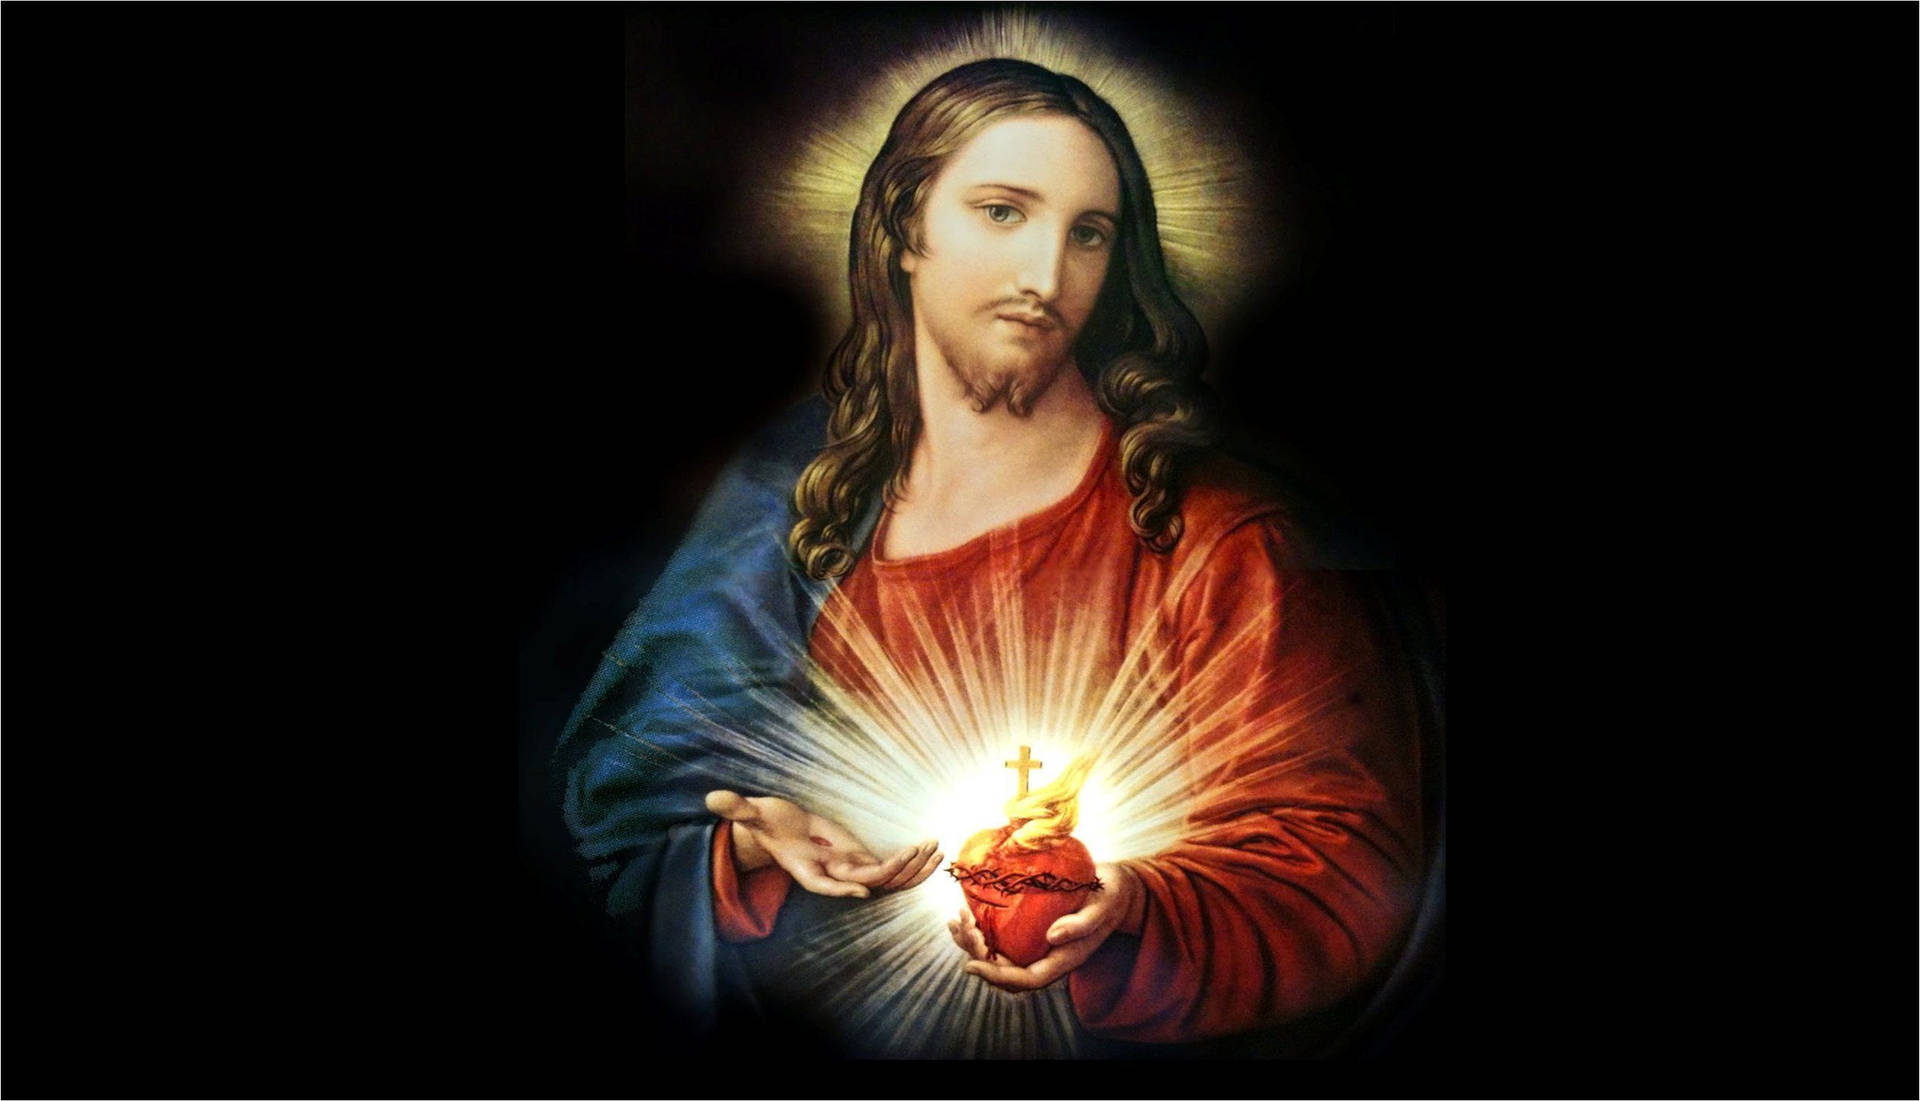 "Oh Sacred Heart of Jesus, Let Us Not Fear But Rejoice" Wallpaper